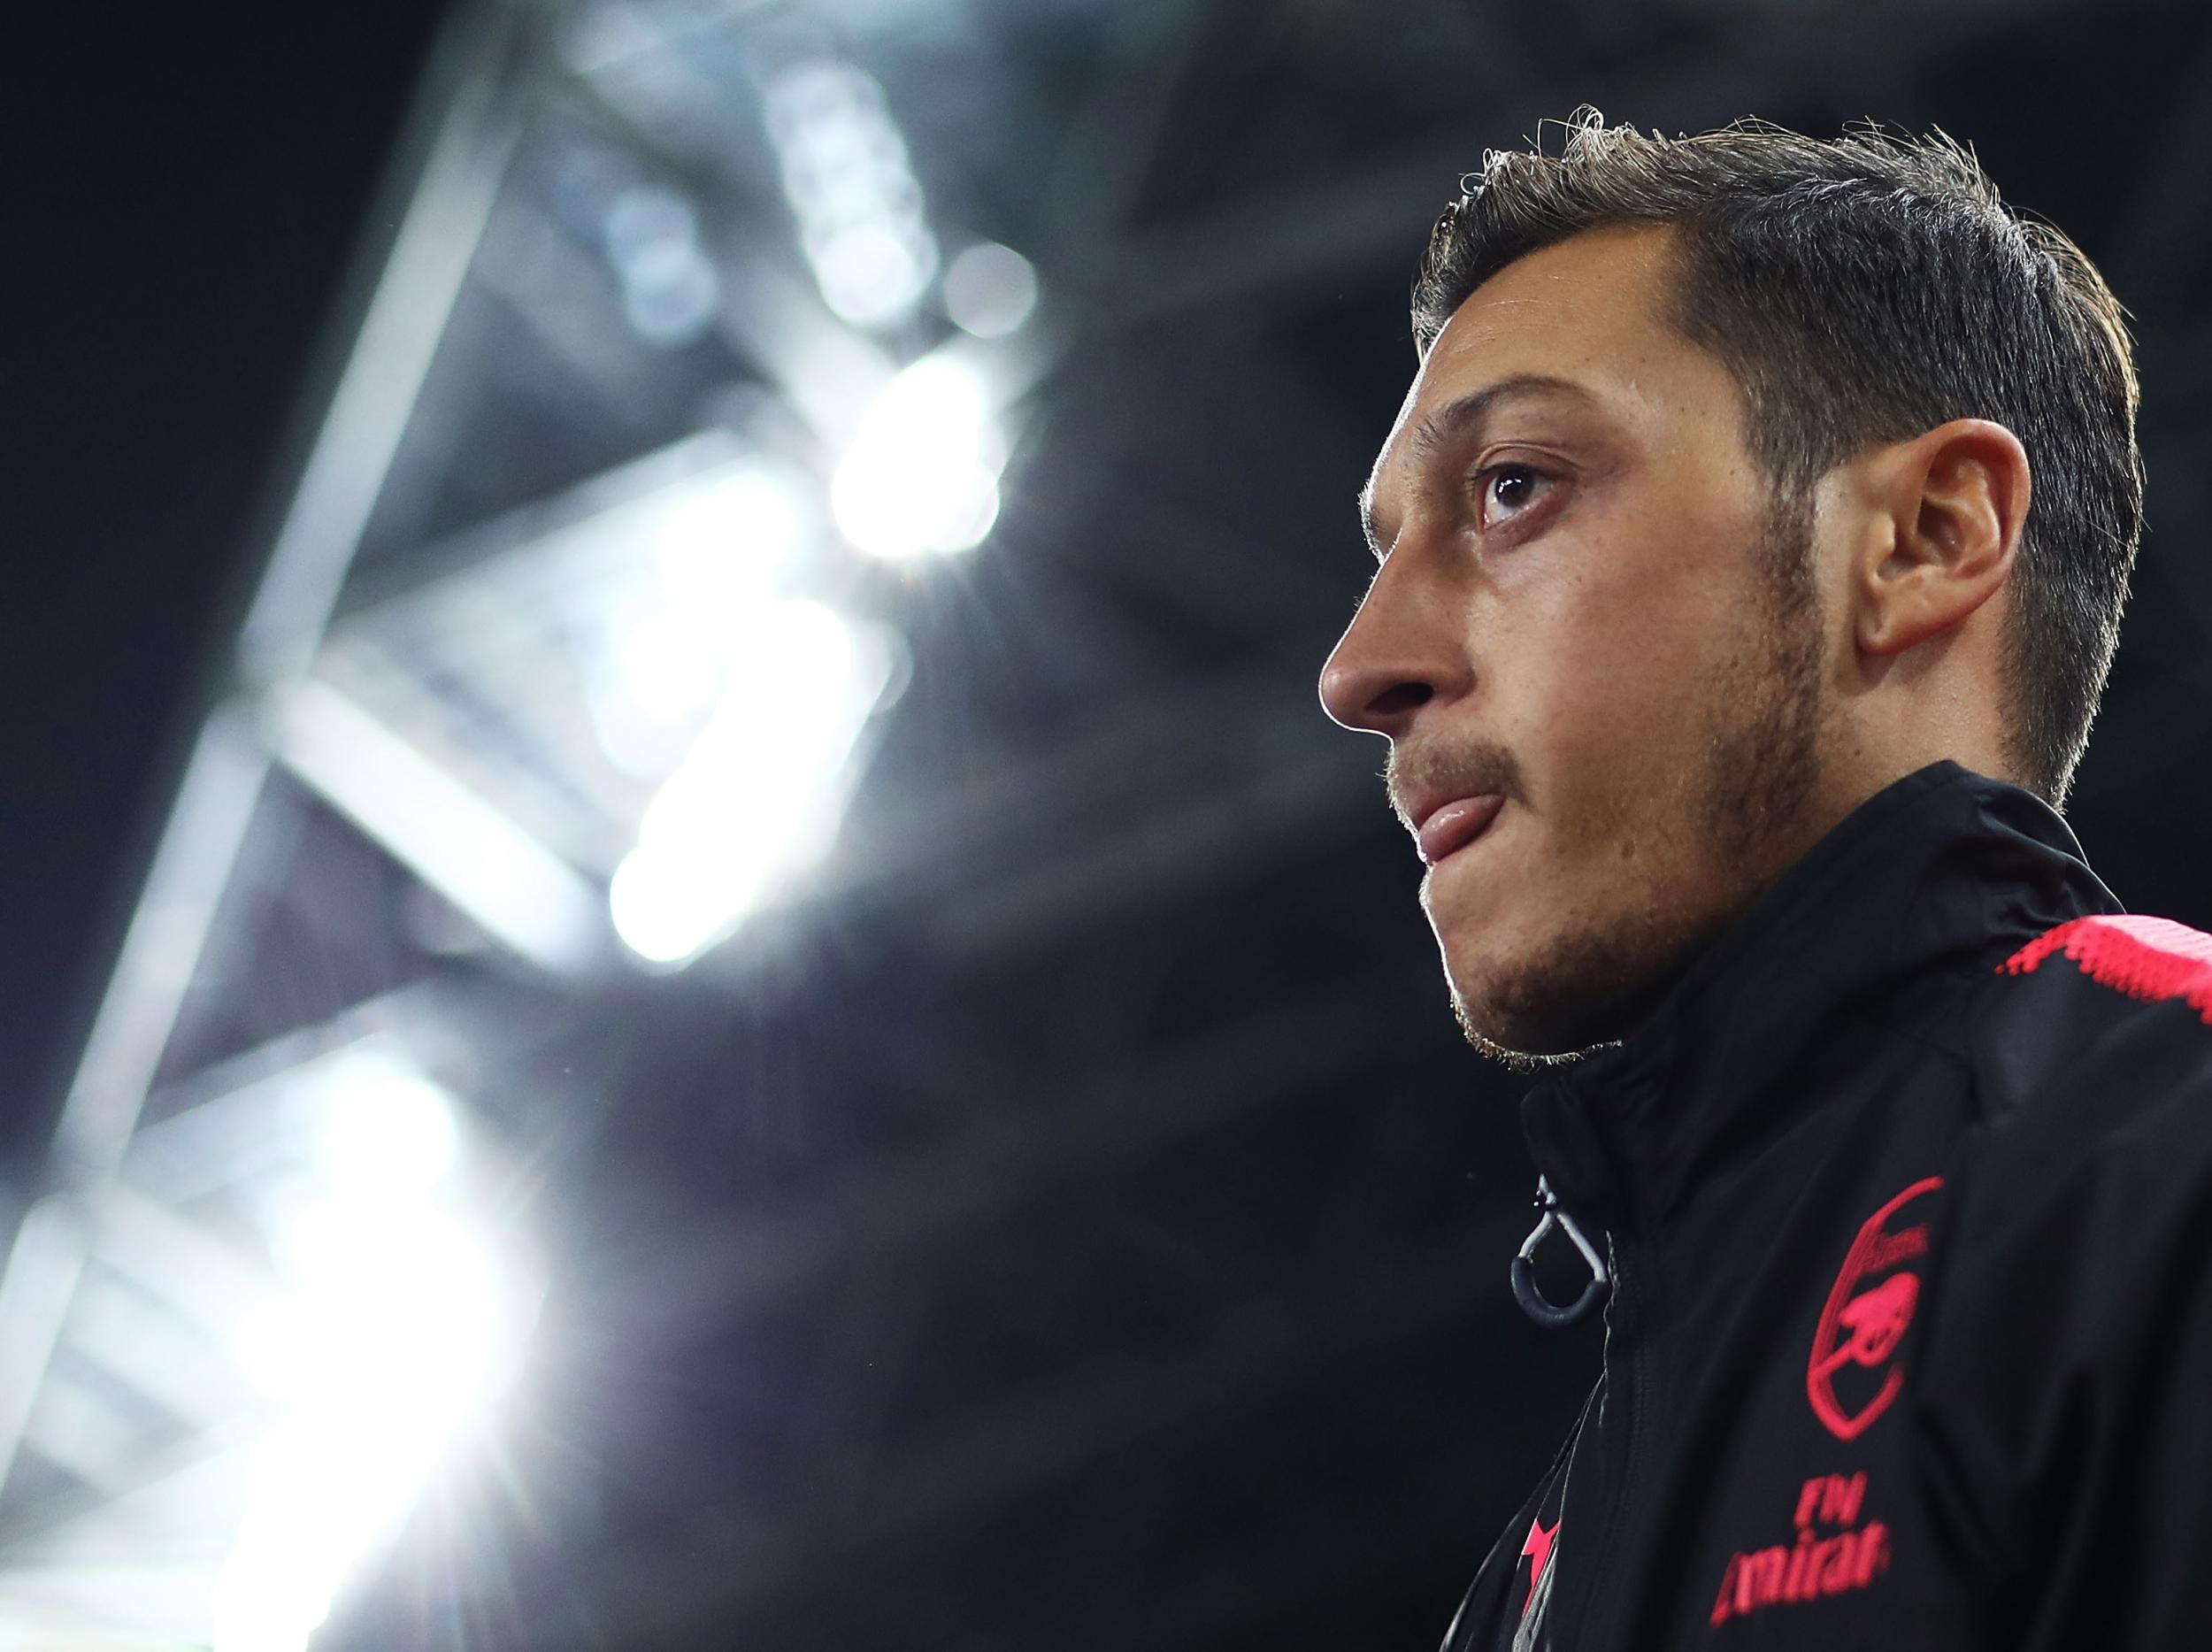 Mesut Ozil looks set to leave the club this summer